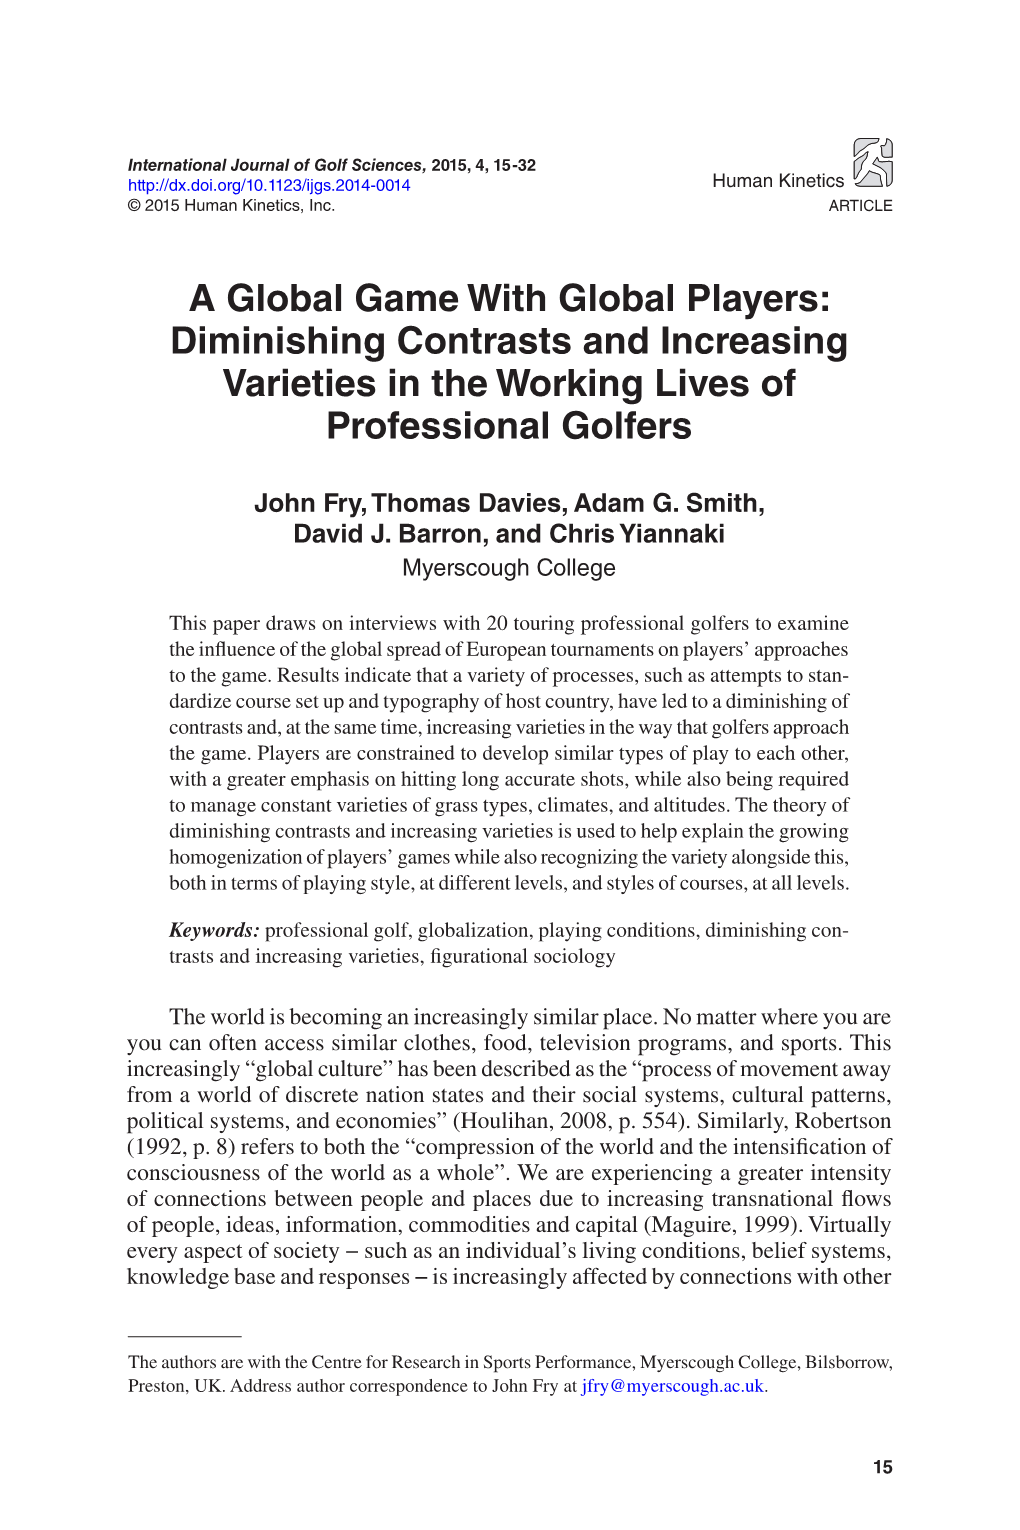 A Global Game with Global Players: Diminishing Contrasts and Increasing Varieties in the Working Lives of Professional Golfers